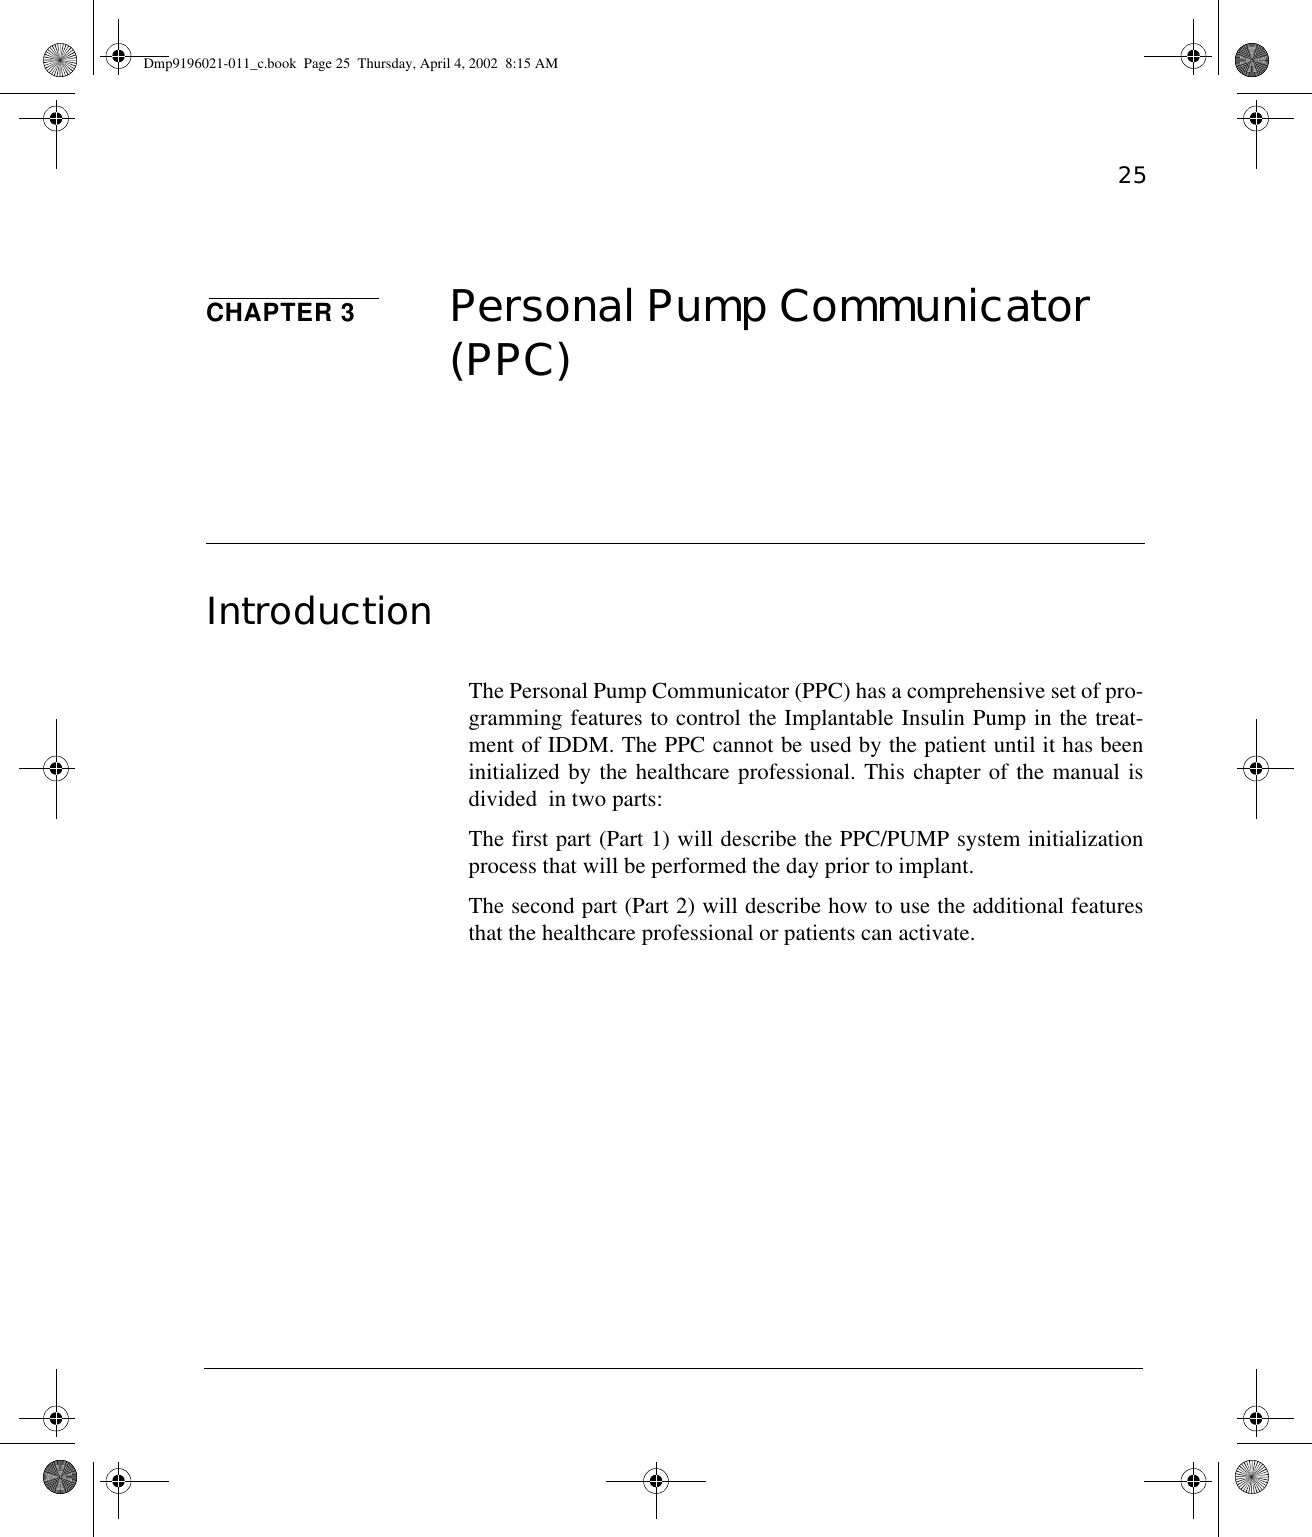 25CHAPTER 3 Personal Pump Communicator (PPC)IntroductionThe Personal Pump Communicator (PPC) has a comprehensive set of pro-gramming features to control the Implantable Insulin Pump in the treat-ment of IDDM. The PPC cannot be used by the patient until it has beeninitialized by the healthcare professional. This chapter of the manual isdivided  in two parts:The first part (Part 1) will describe the PPC/PUMP system initializationprocess that will be performed the day prior to implant.The second part (Part 2) will describe how to use the additional featuresthat the healthcare professional or patients can activate.Dmp9196021-011_c.book  Page 25  Thursday, April 4, 2002  8:15 AM